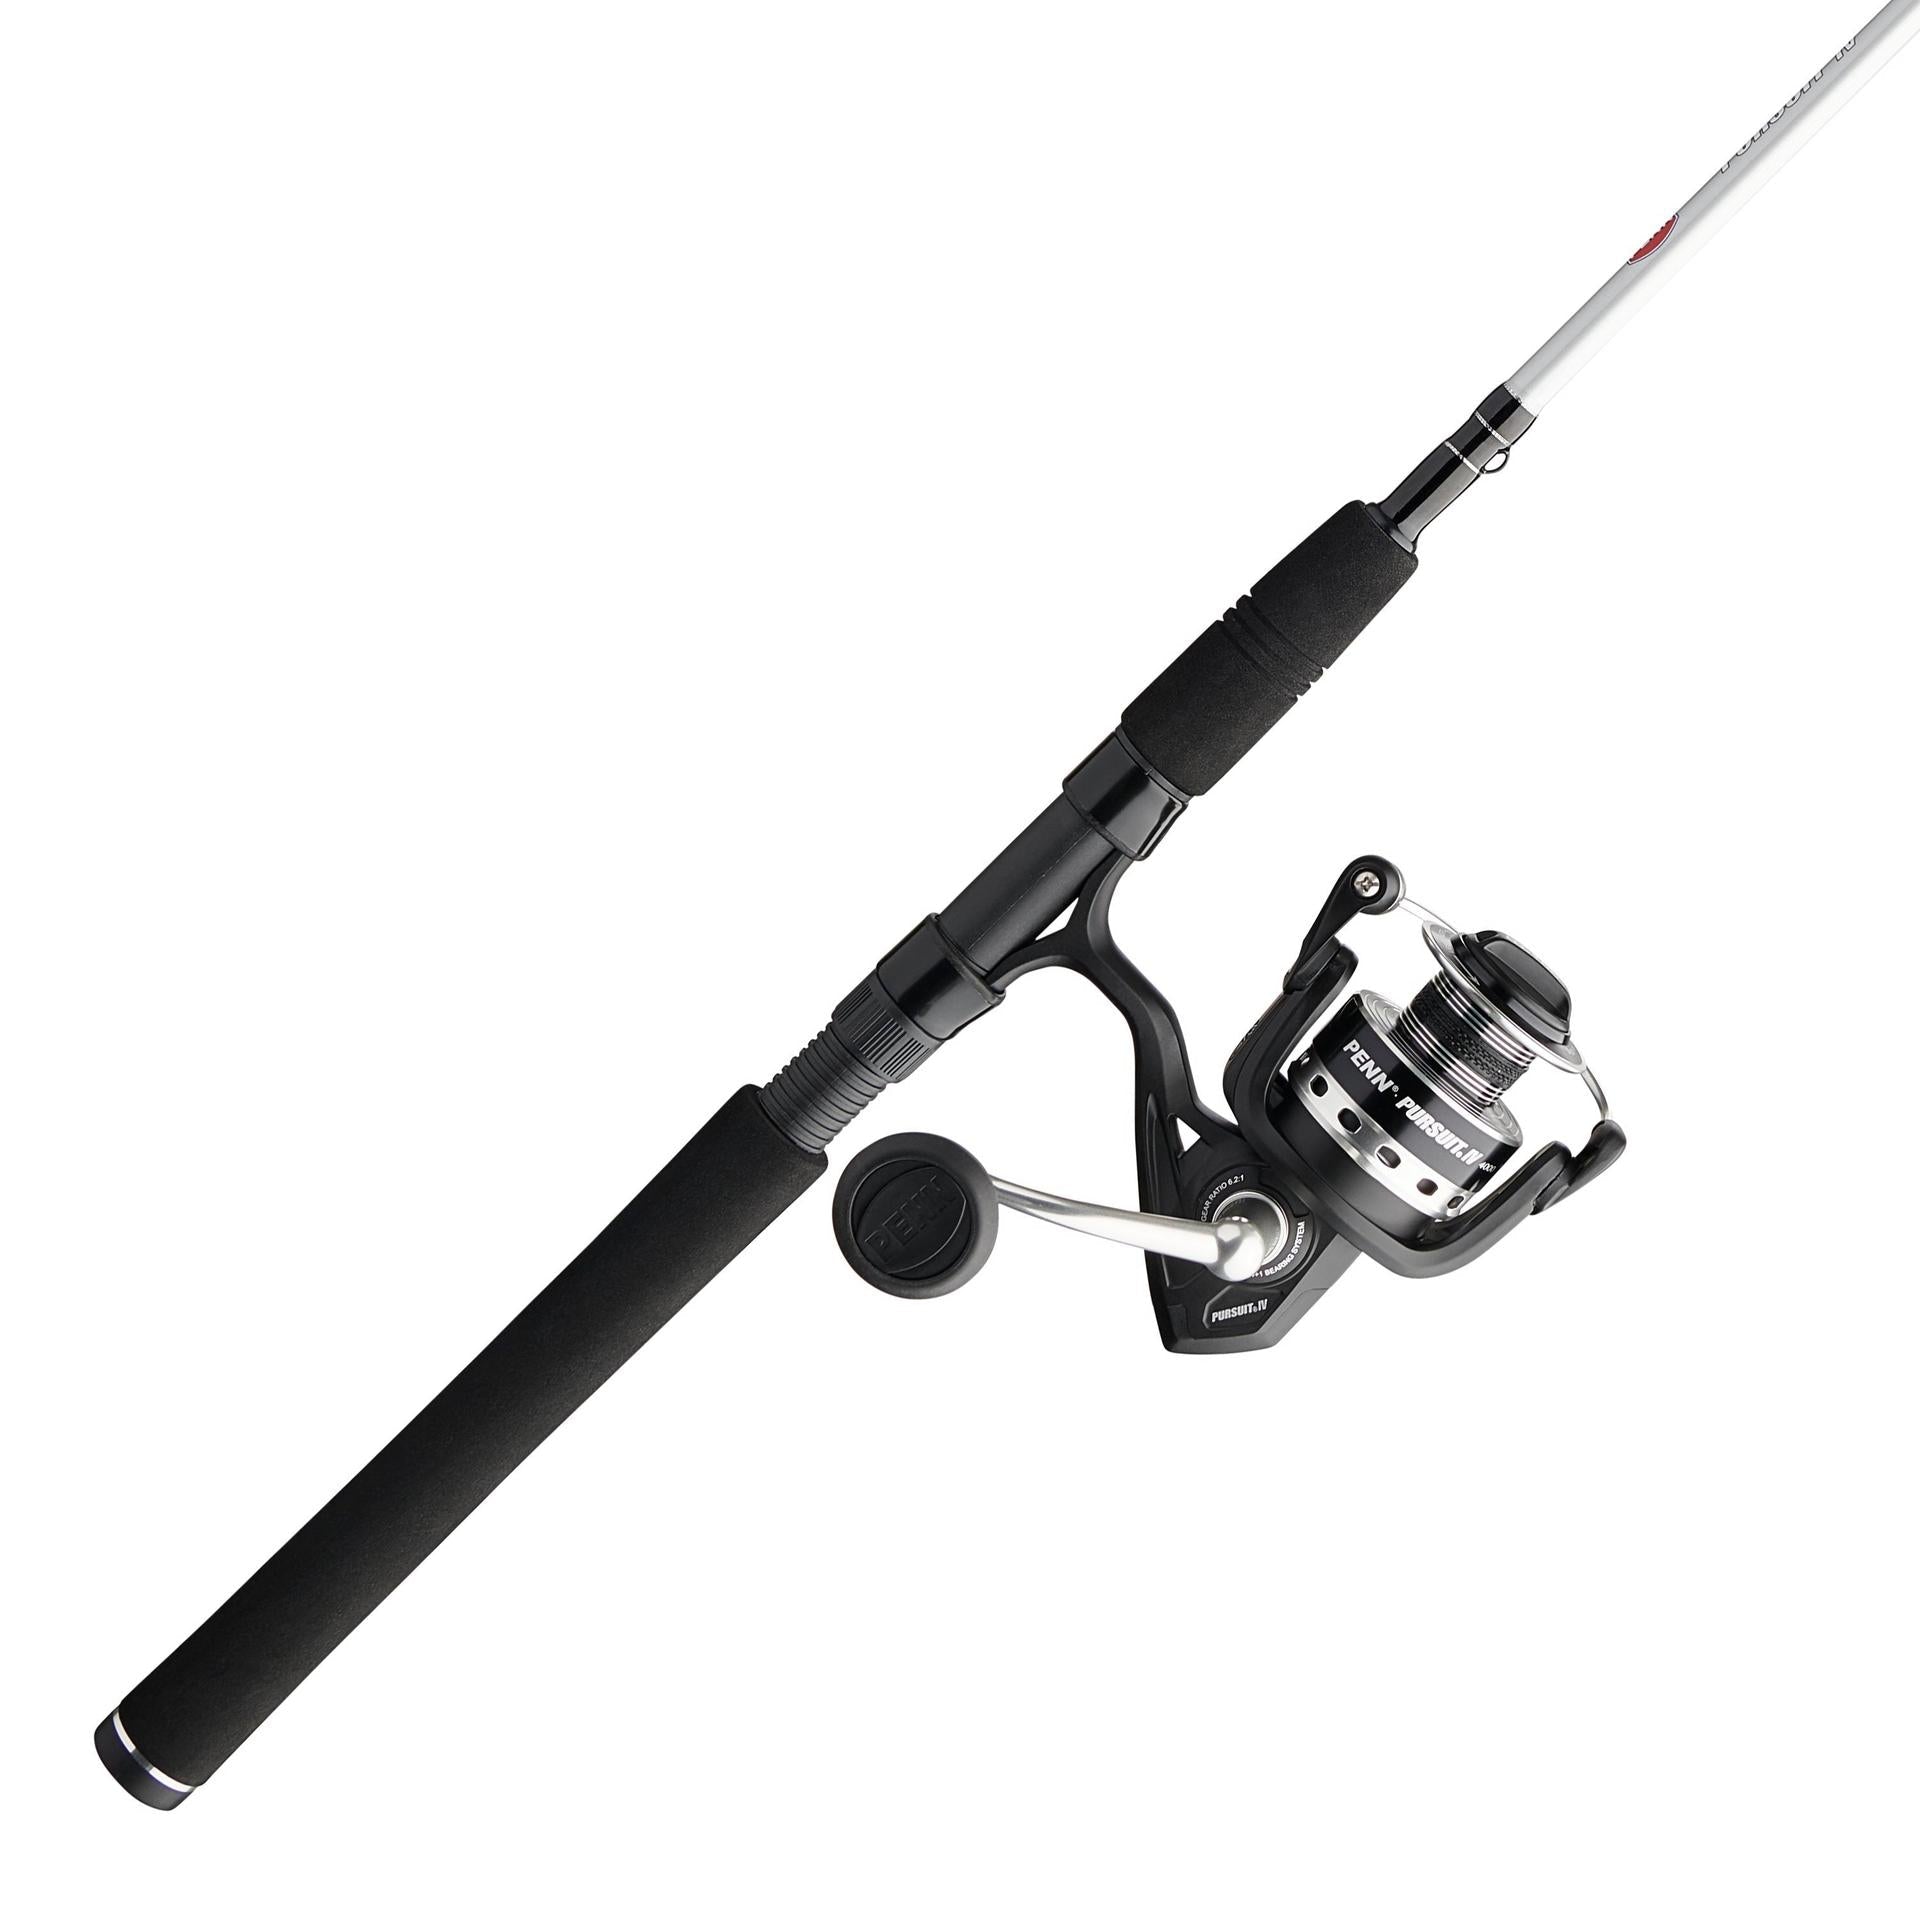 Portable Fishing Rod Reel Combo for Travel Italy